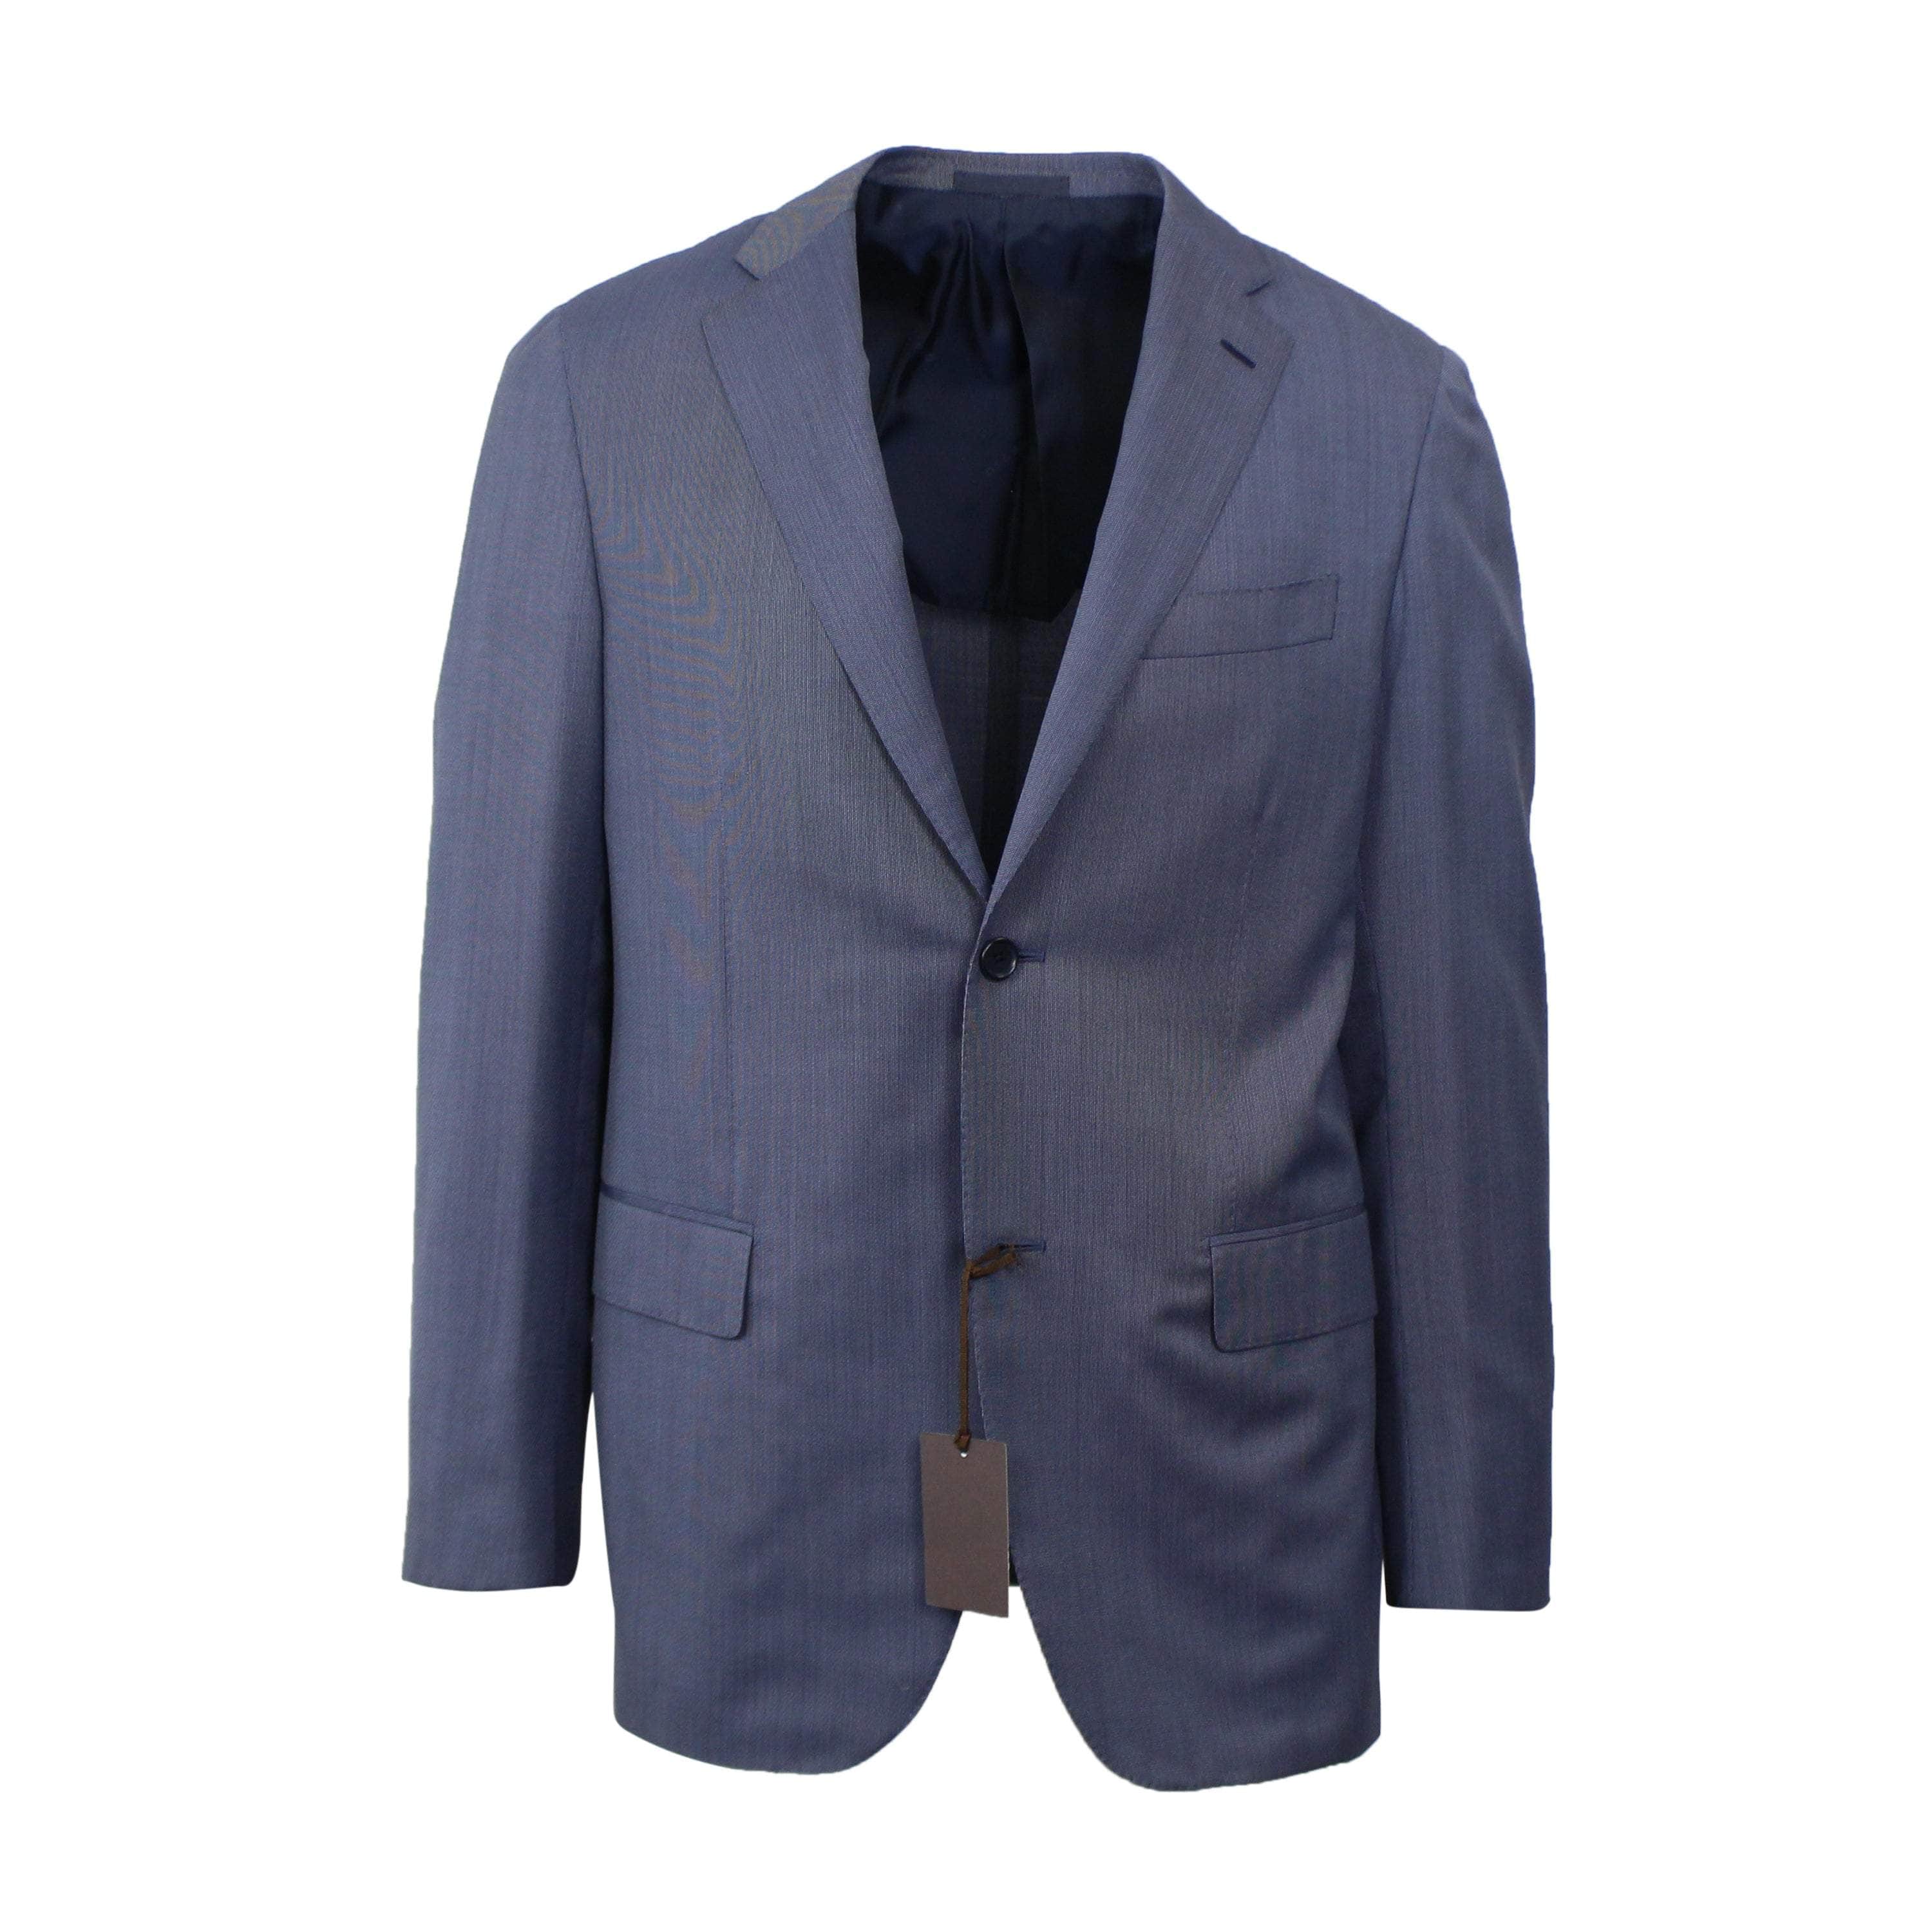 Caruso 500-750, caruso, channelenable-all, chicmi, couponcollection, main-clothing, shop375, size-50, Stadium Goods, stadiumgoods 50 Ocean Blue Single Breasted Wool And Silk Pinstriped Suit 7R CRS-XTPS-0178/50 CRS-XTPS-0178/50